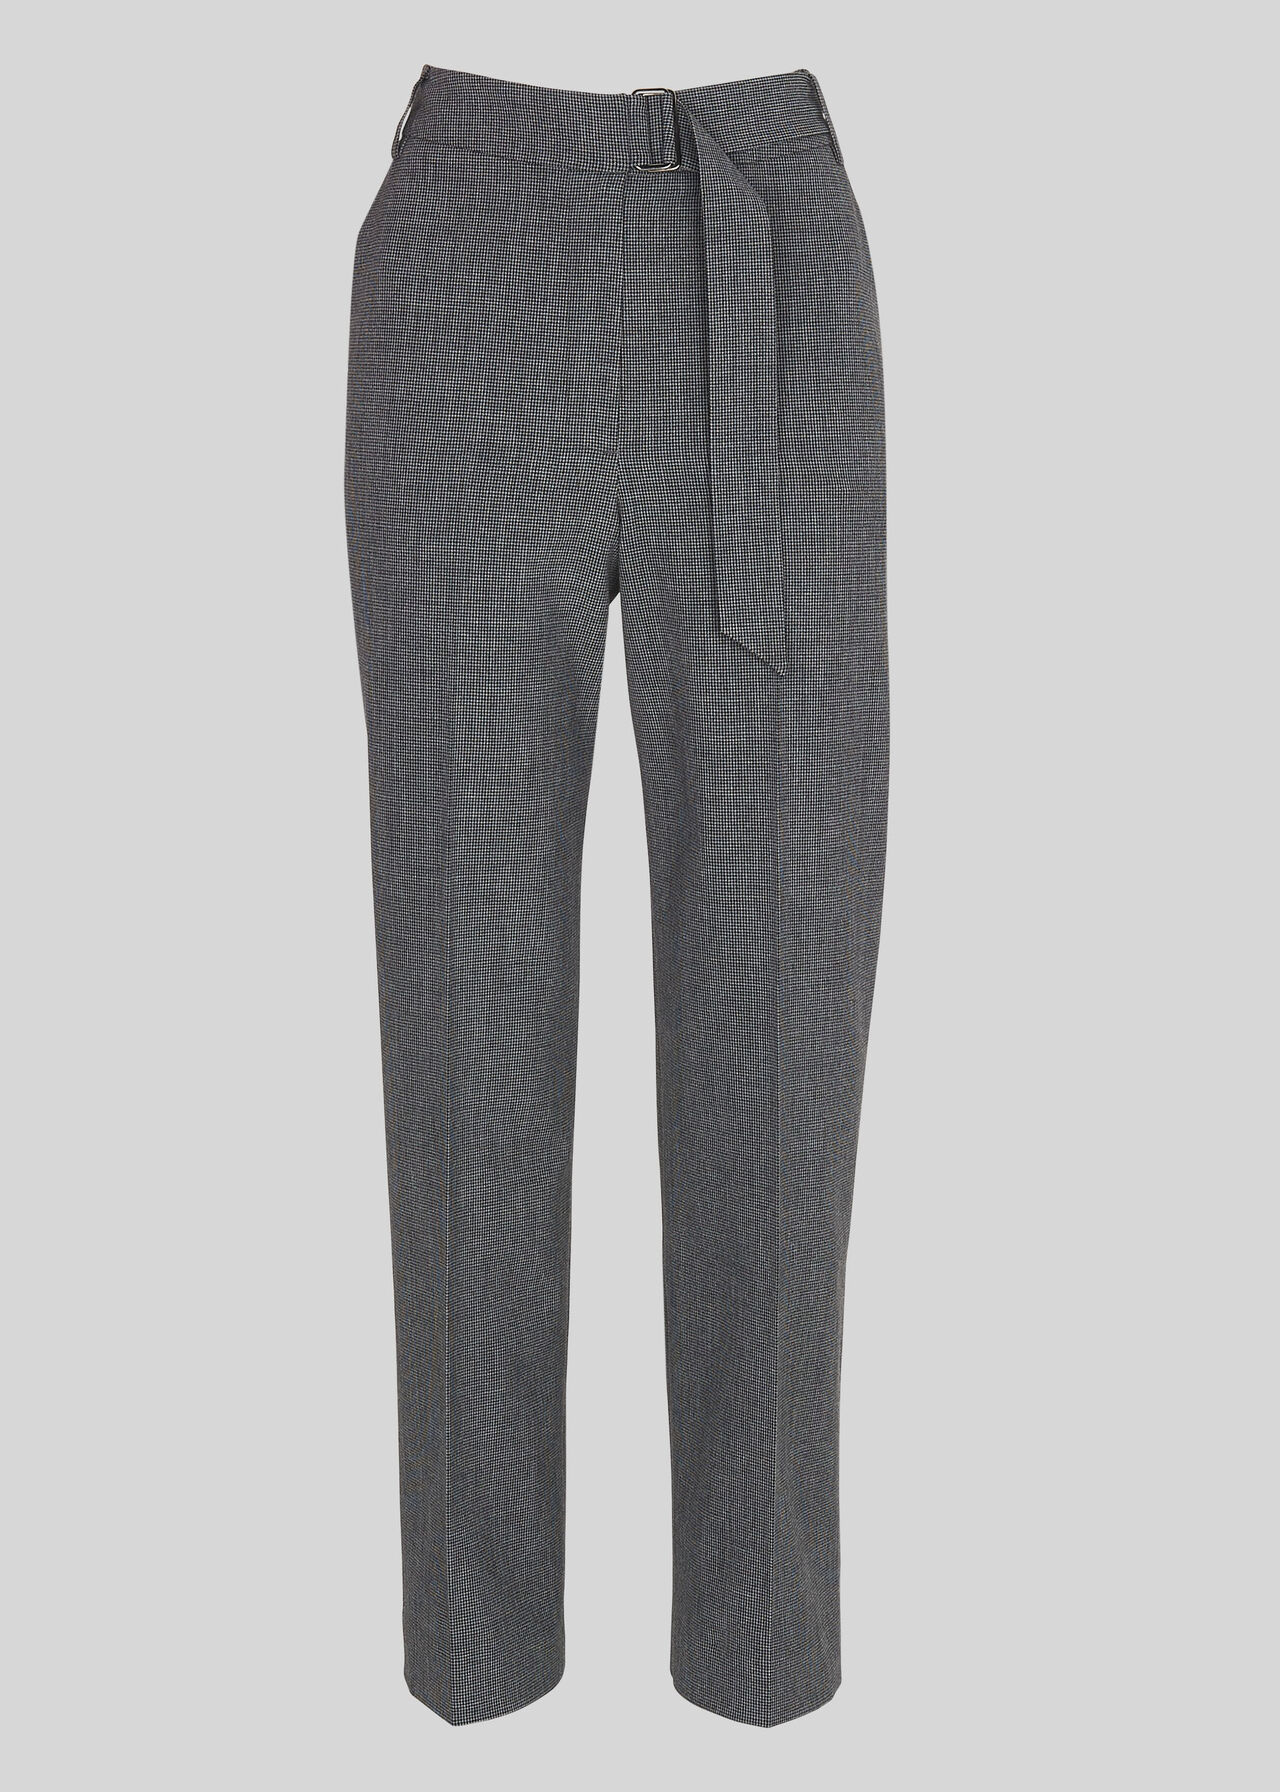 Aliza Belted Check Trouser